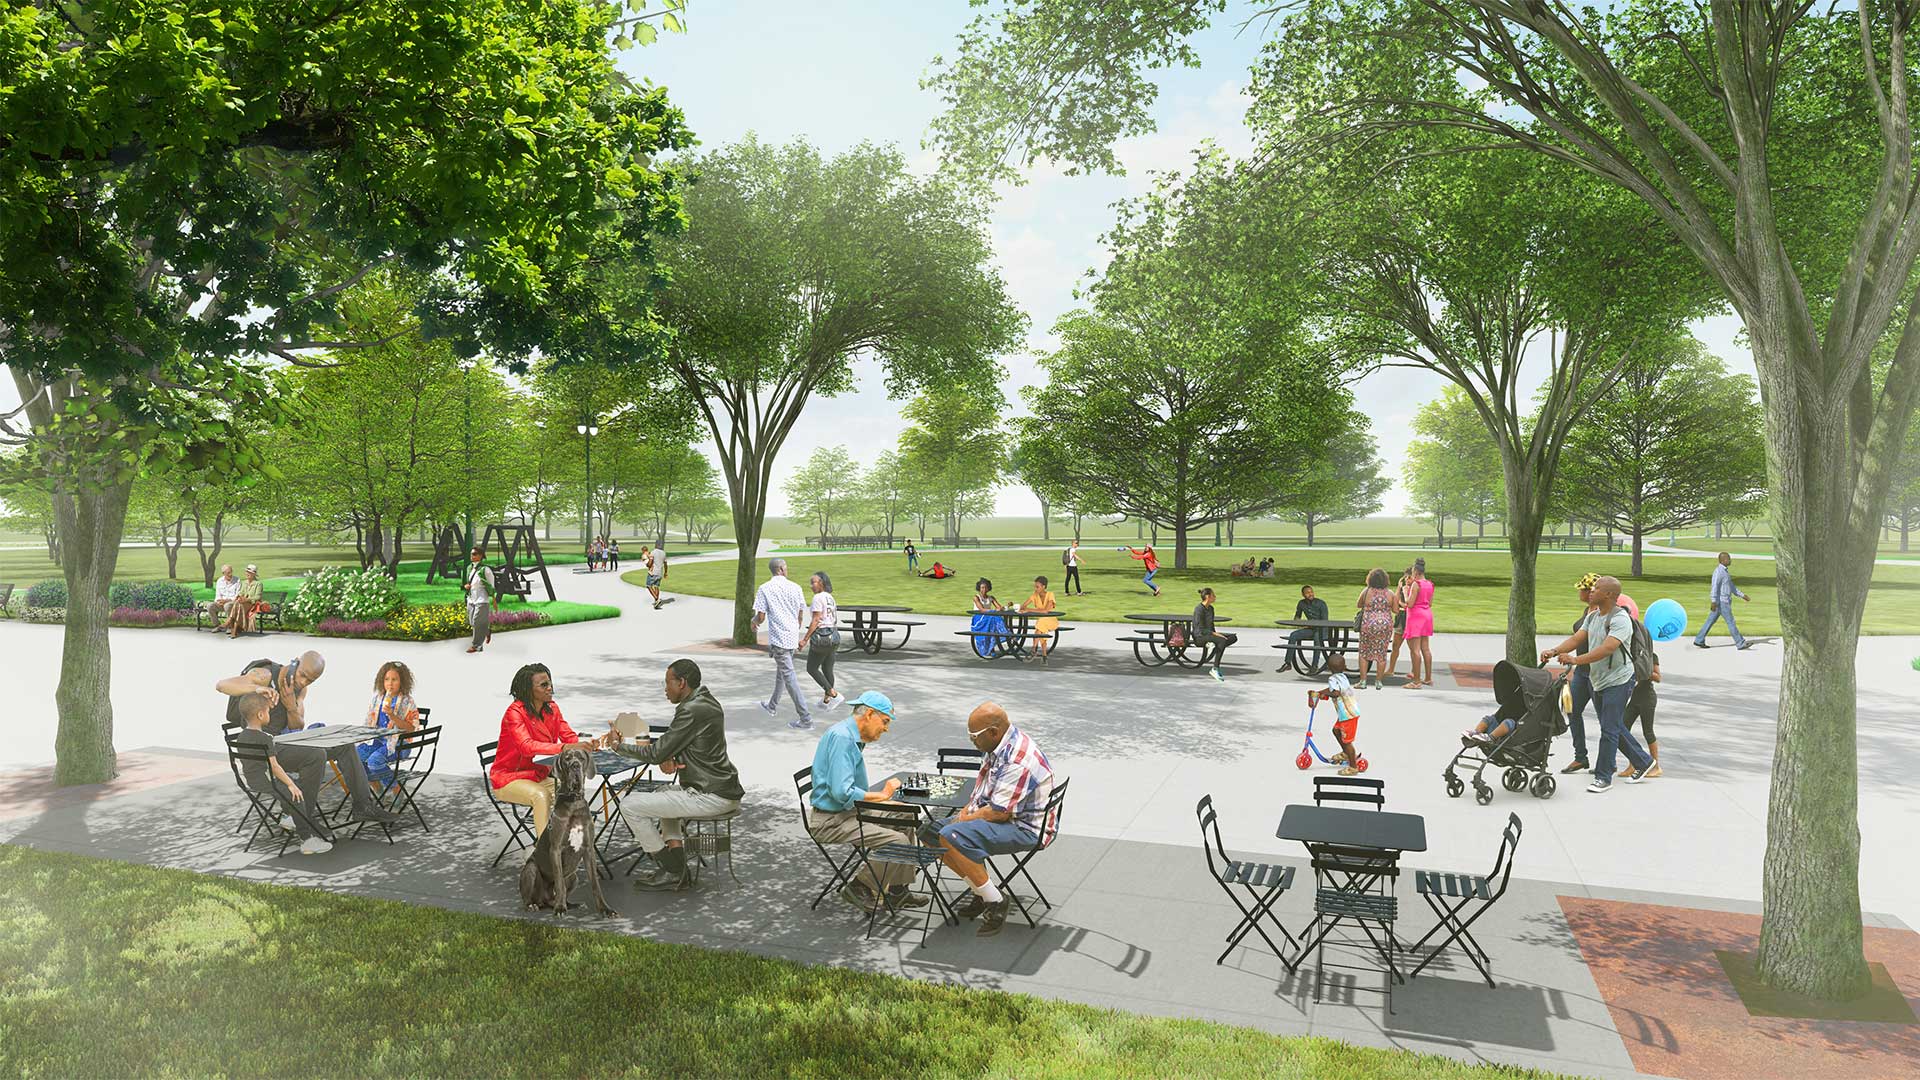 rendering of a plaza at a park outfitted with tables and chair